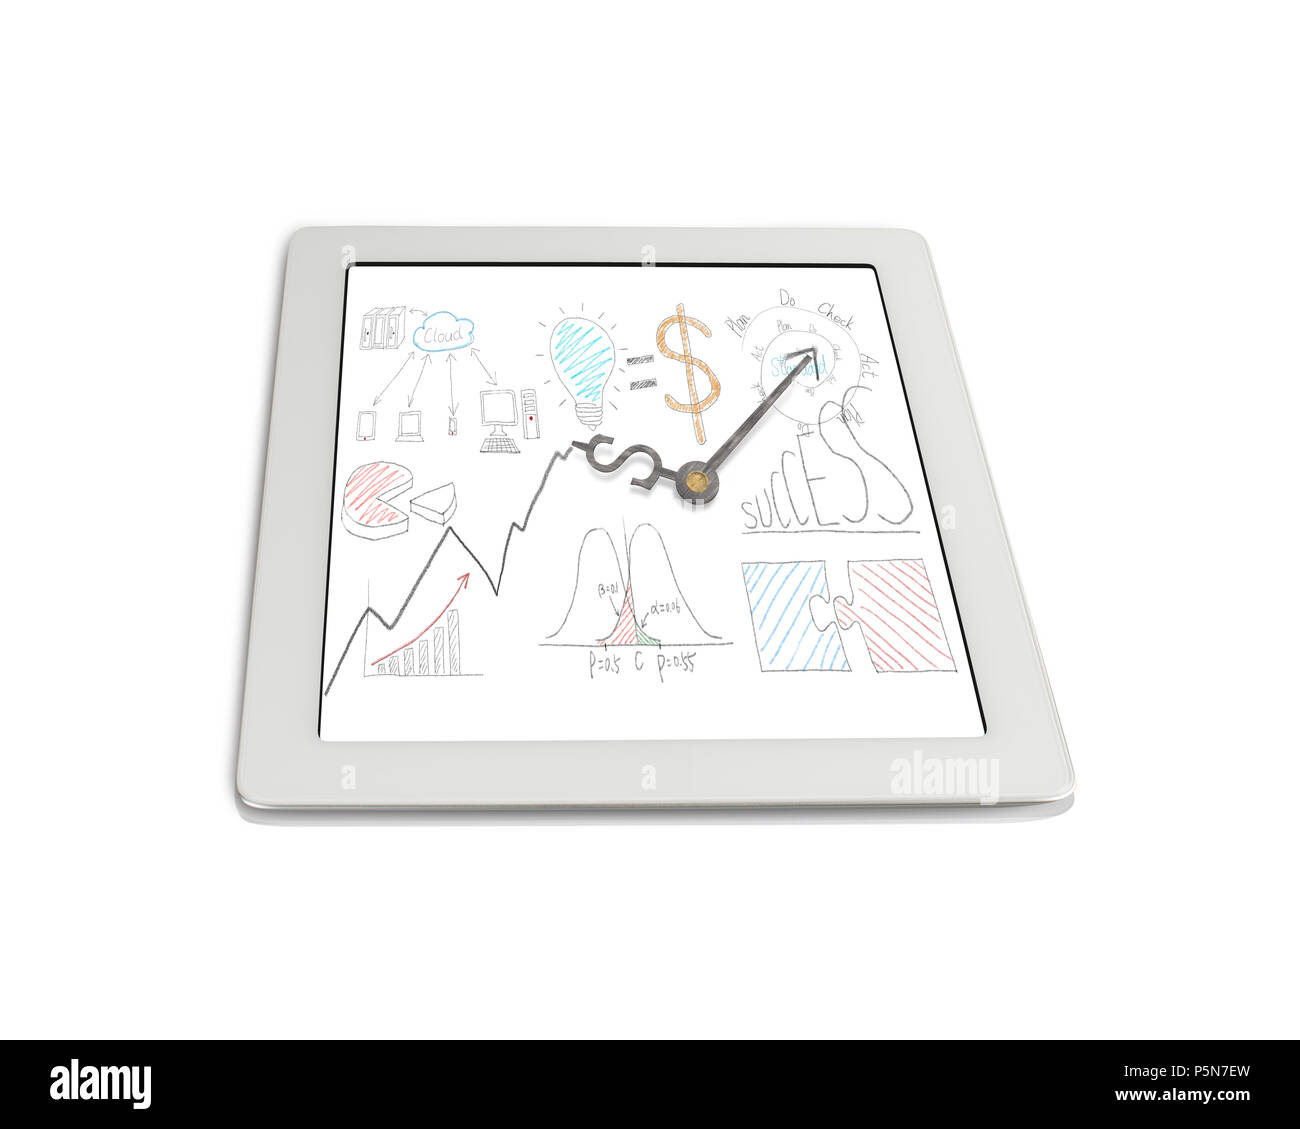 Money symbol clock hands with Statistics doodles on digital tablet isolated in white Stock Photo